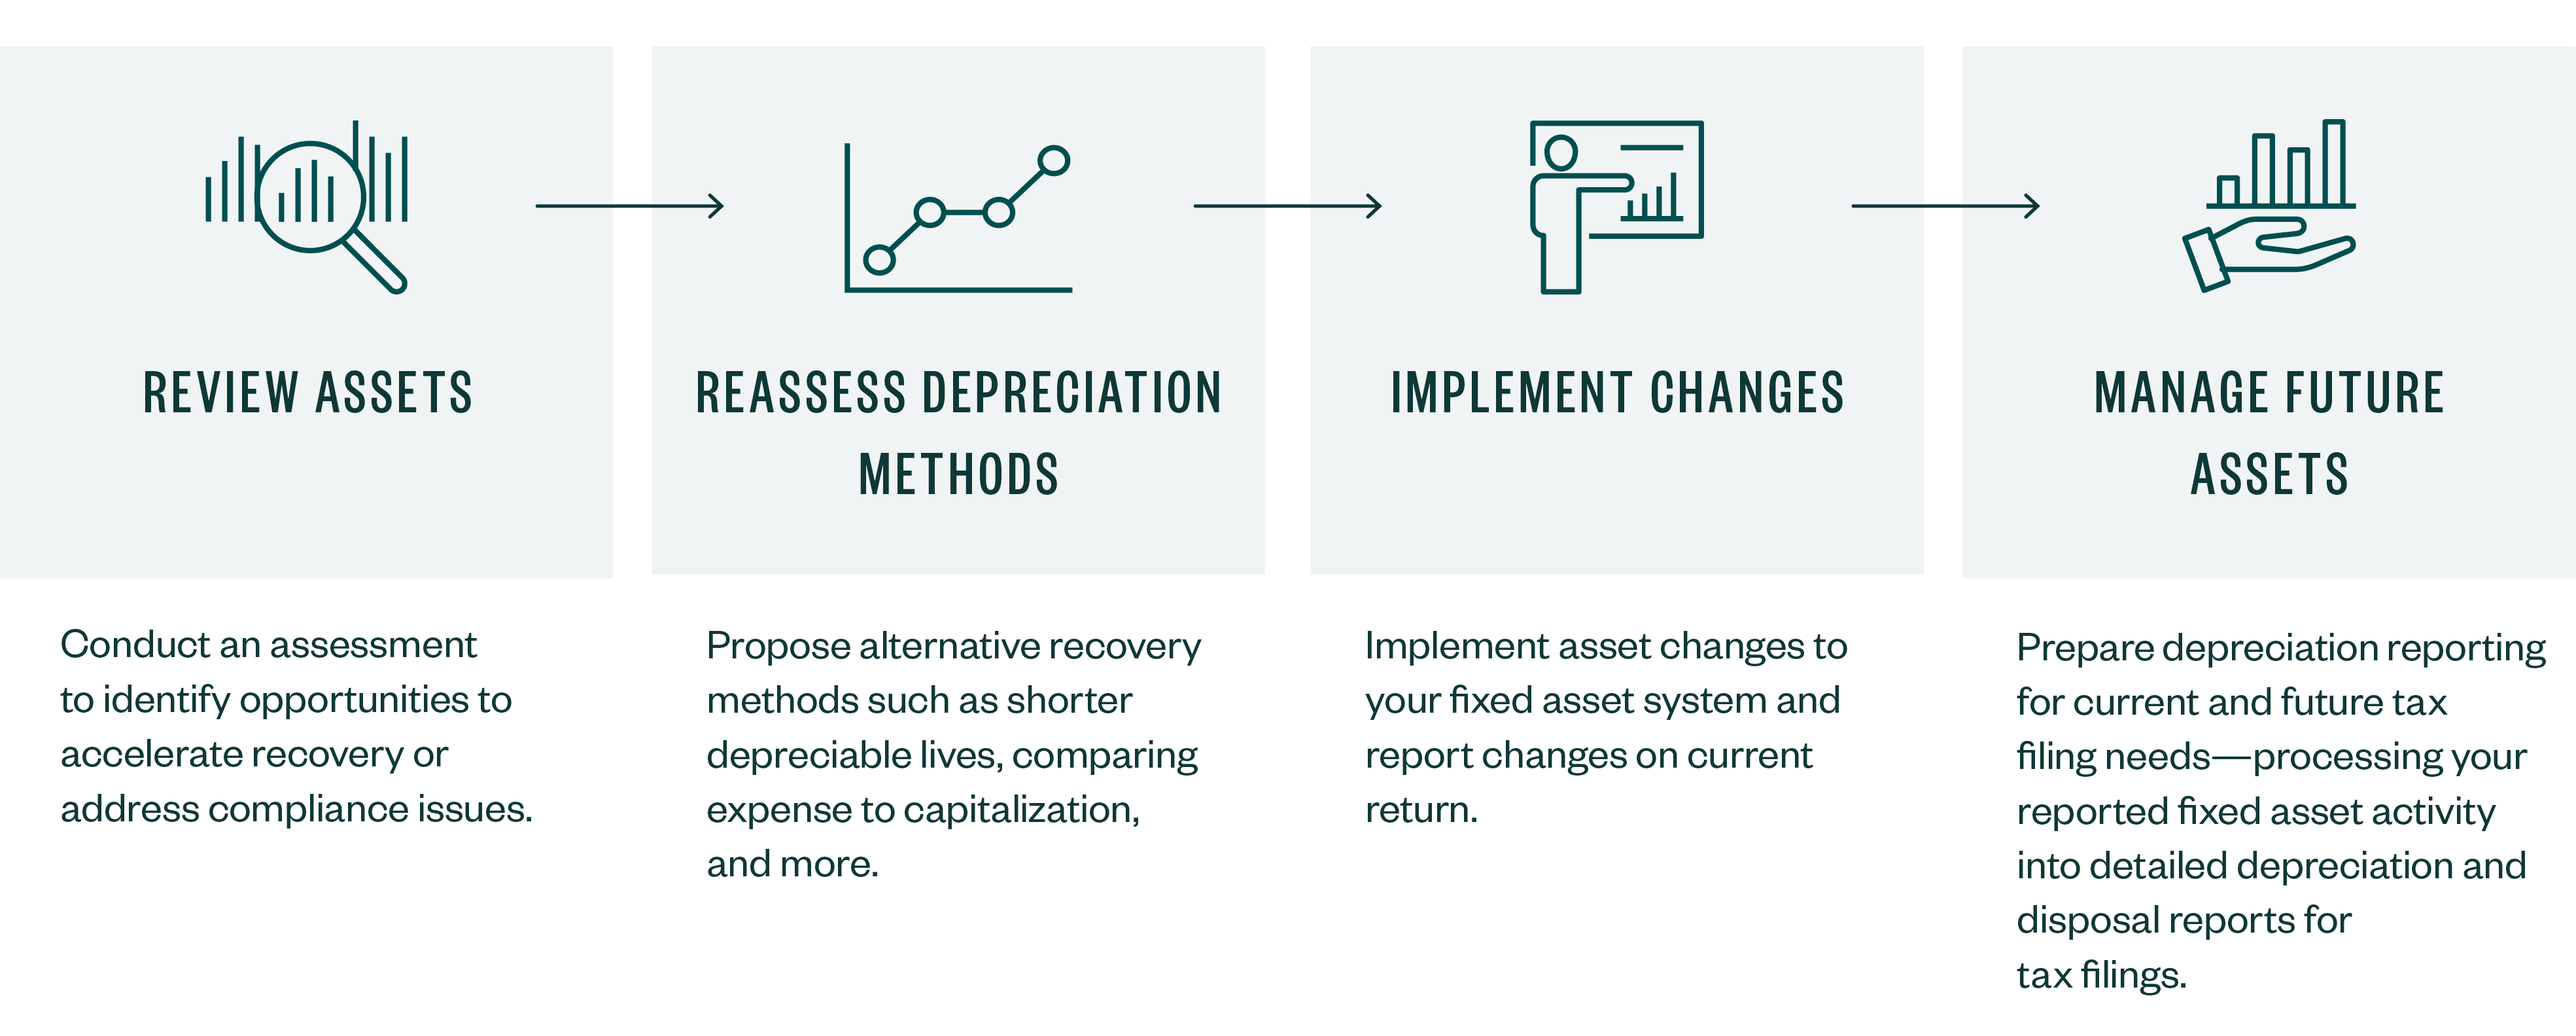 How the analysis process works, the steps are review assets to reassess depreciation methods to implement changes to manage future assets.